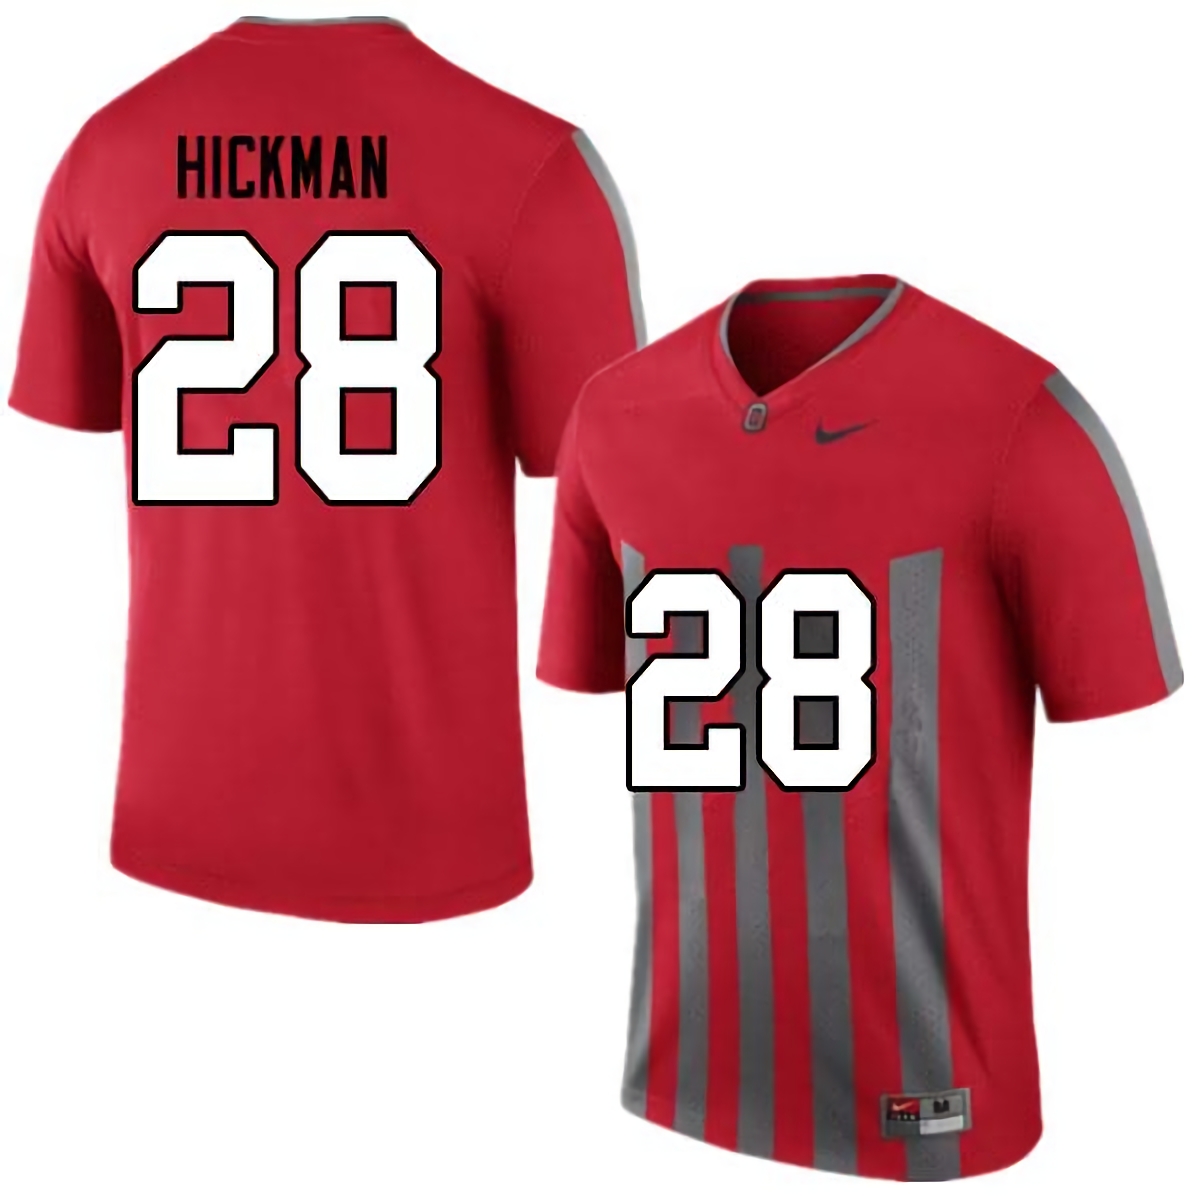 Ronnie Hickman Ohio State Buckeyes Men's NCAA #28 Nike Throwback Red College Stitched Football Jersey BHF5056RY